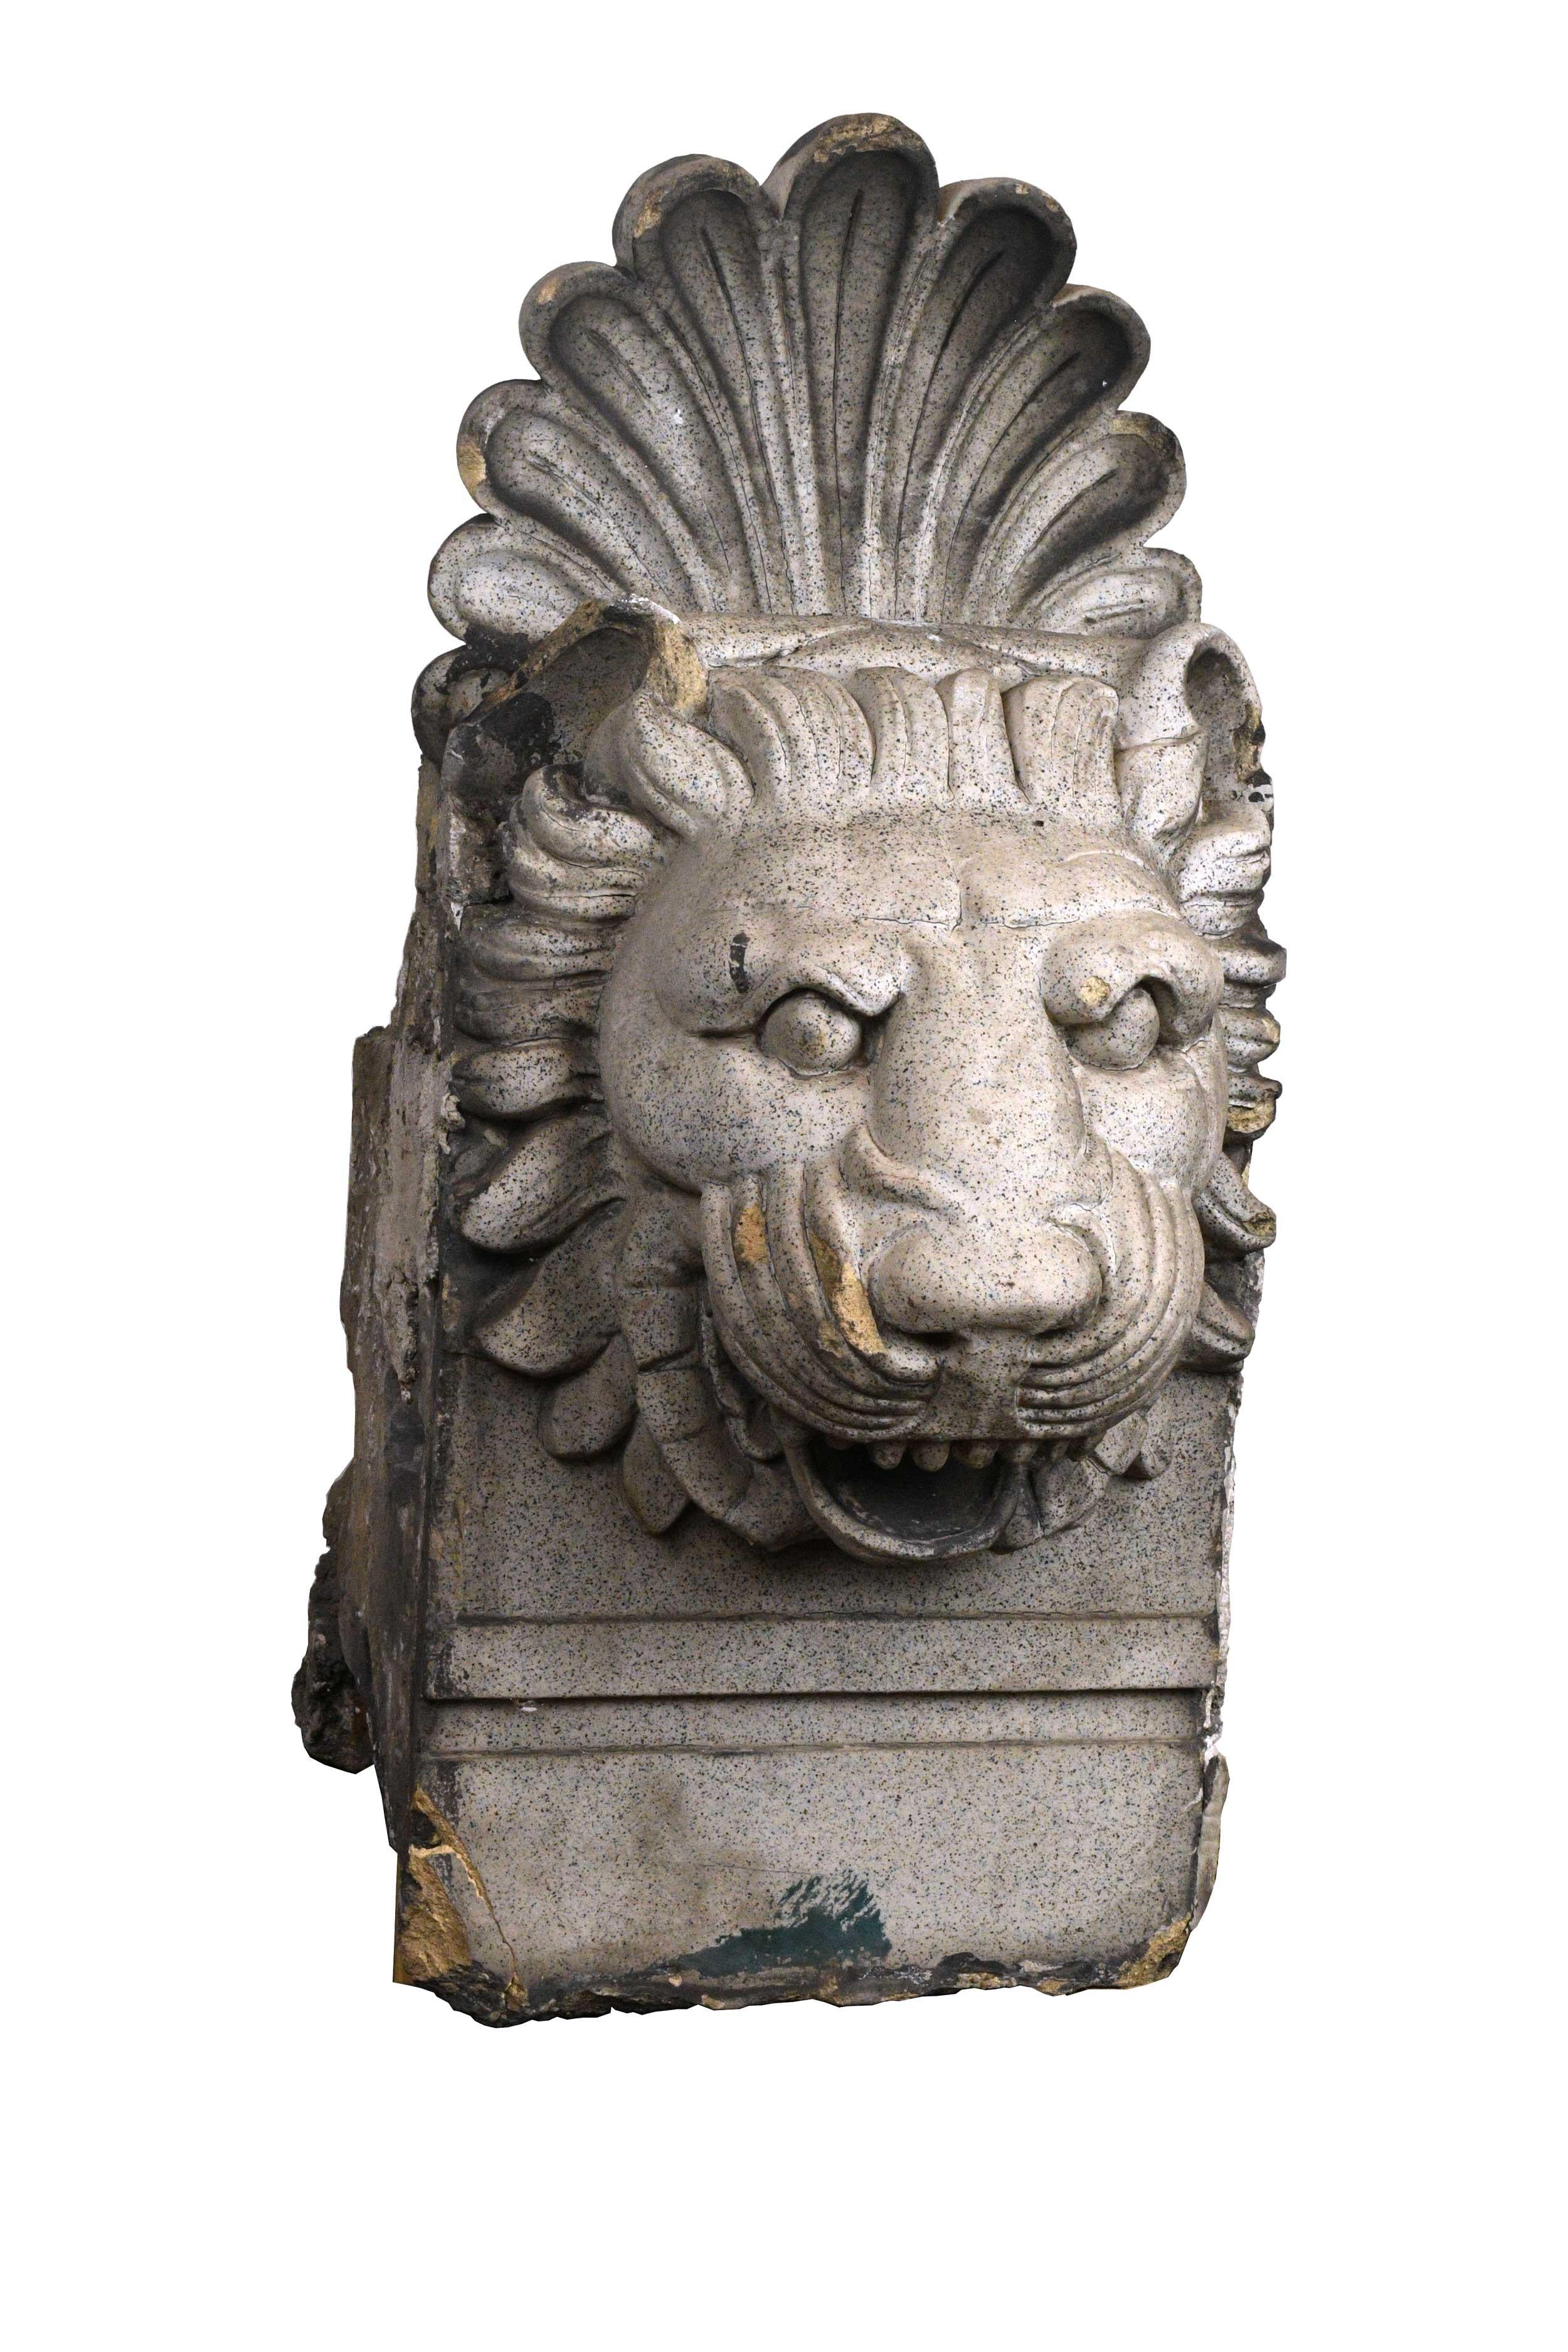 These stone lion heads originally adorned the cornice of the Boatmen’s Bank Building in St. Louis, Missouri. The building was completed in 1914 by the architecture partnership of Eames and Young, one of the city’s most talented and influential early